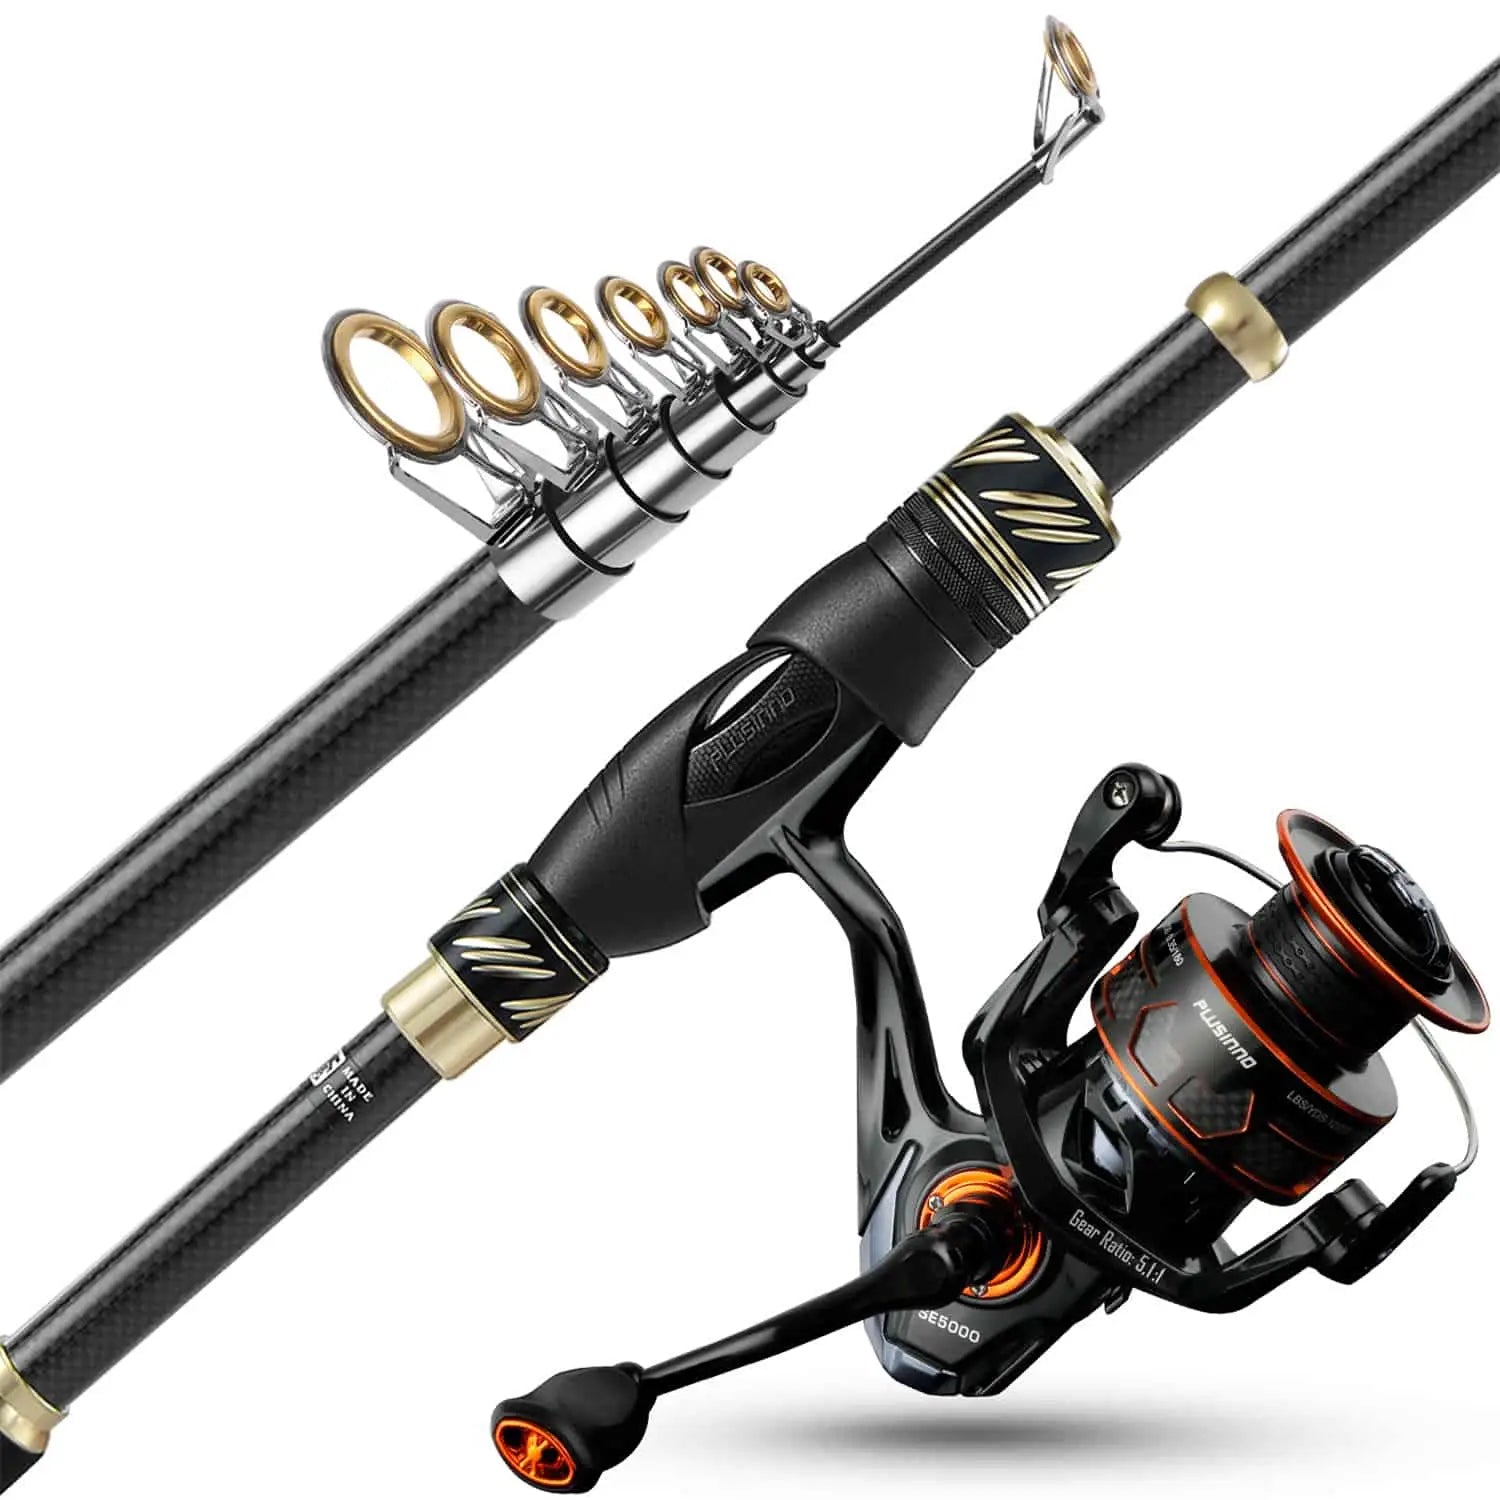 Retractable Fishing Pole,Telescope Fishing Poles and Reels Combo - Pole Reel  Starter Combo, Lightweight Portable Fishing Tackle Rod Fishing Accessories  for Bass, Trout, Saltwater, Rod & Reel Combos -  Canada